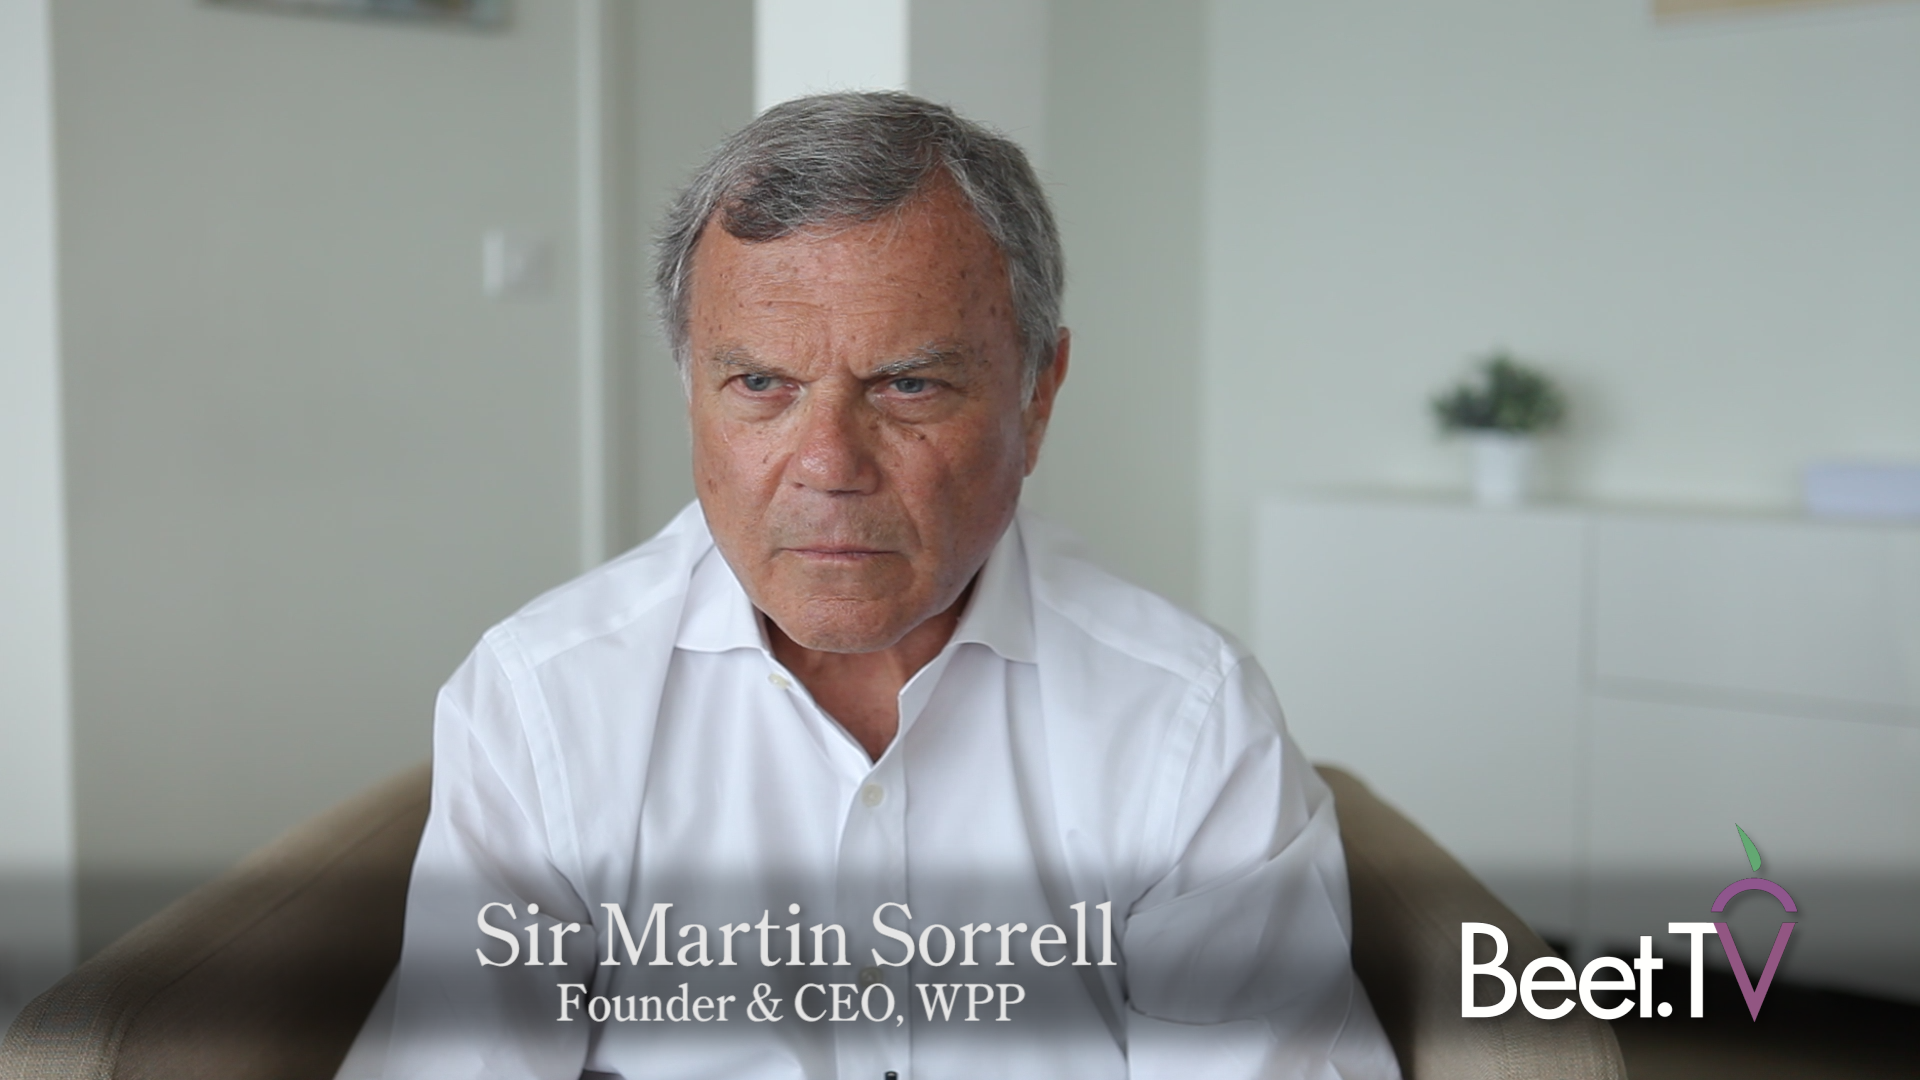 WPP’s Sir Martin Sorrell on Cannes: Excessive & Expensive But No Boycott